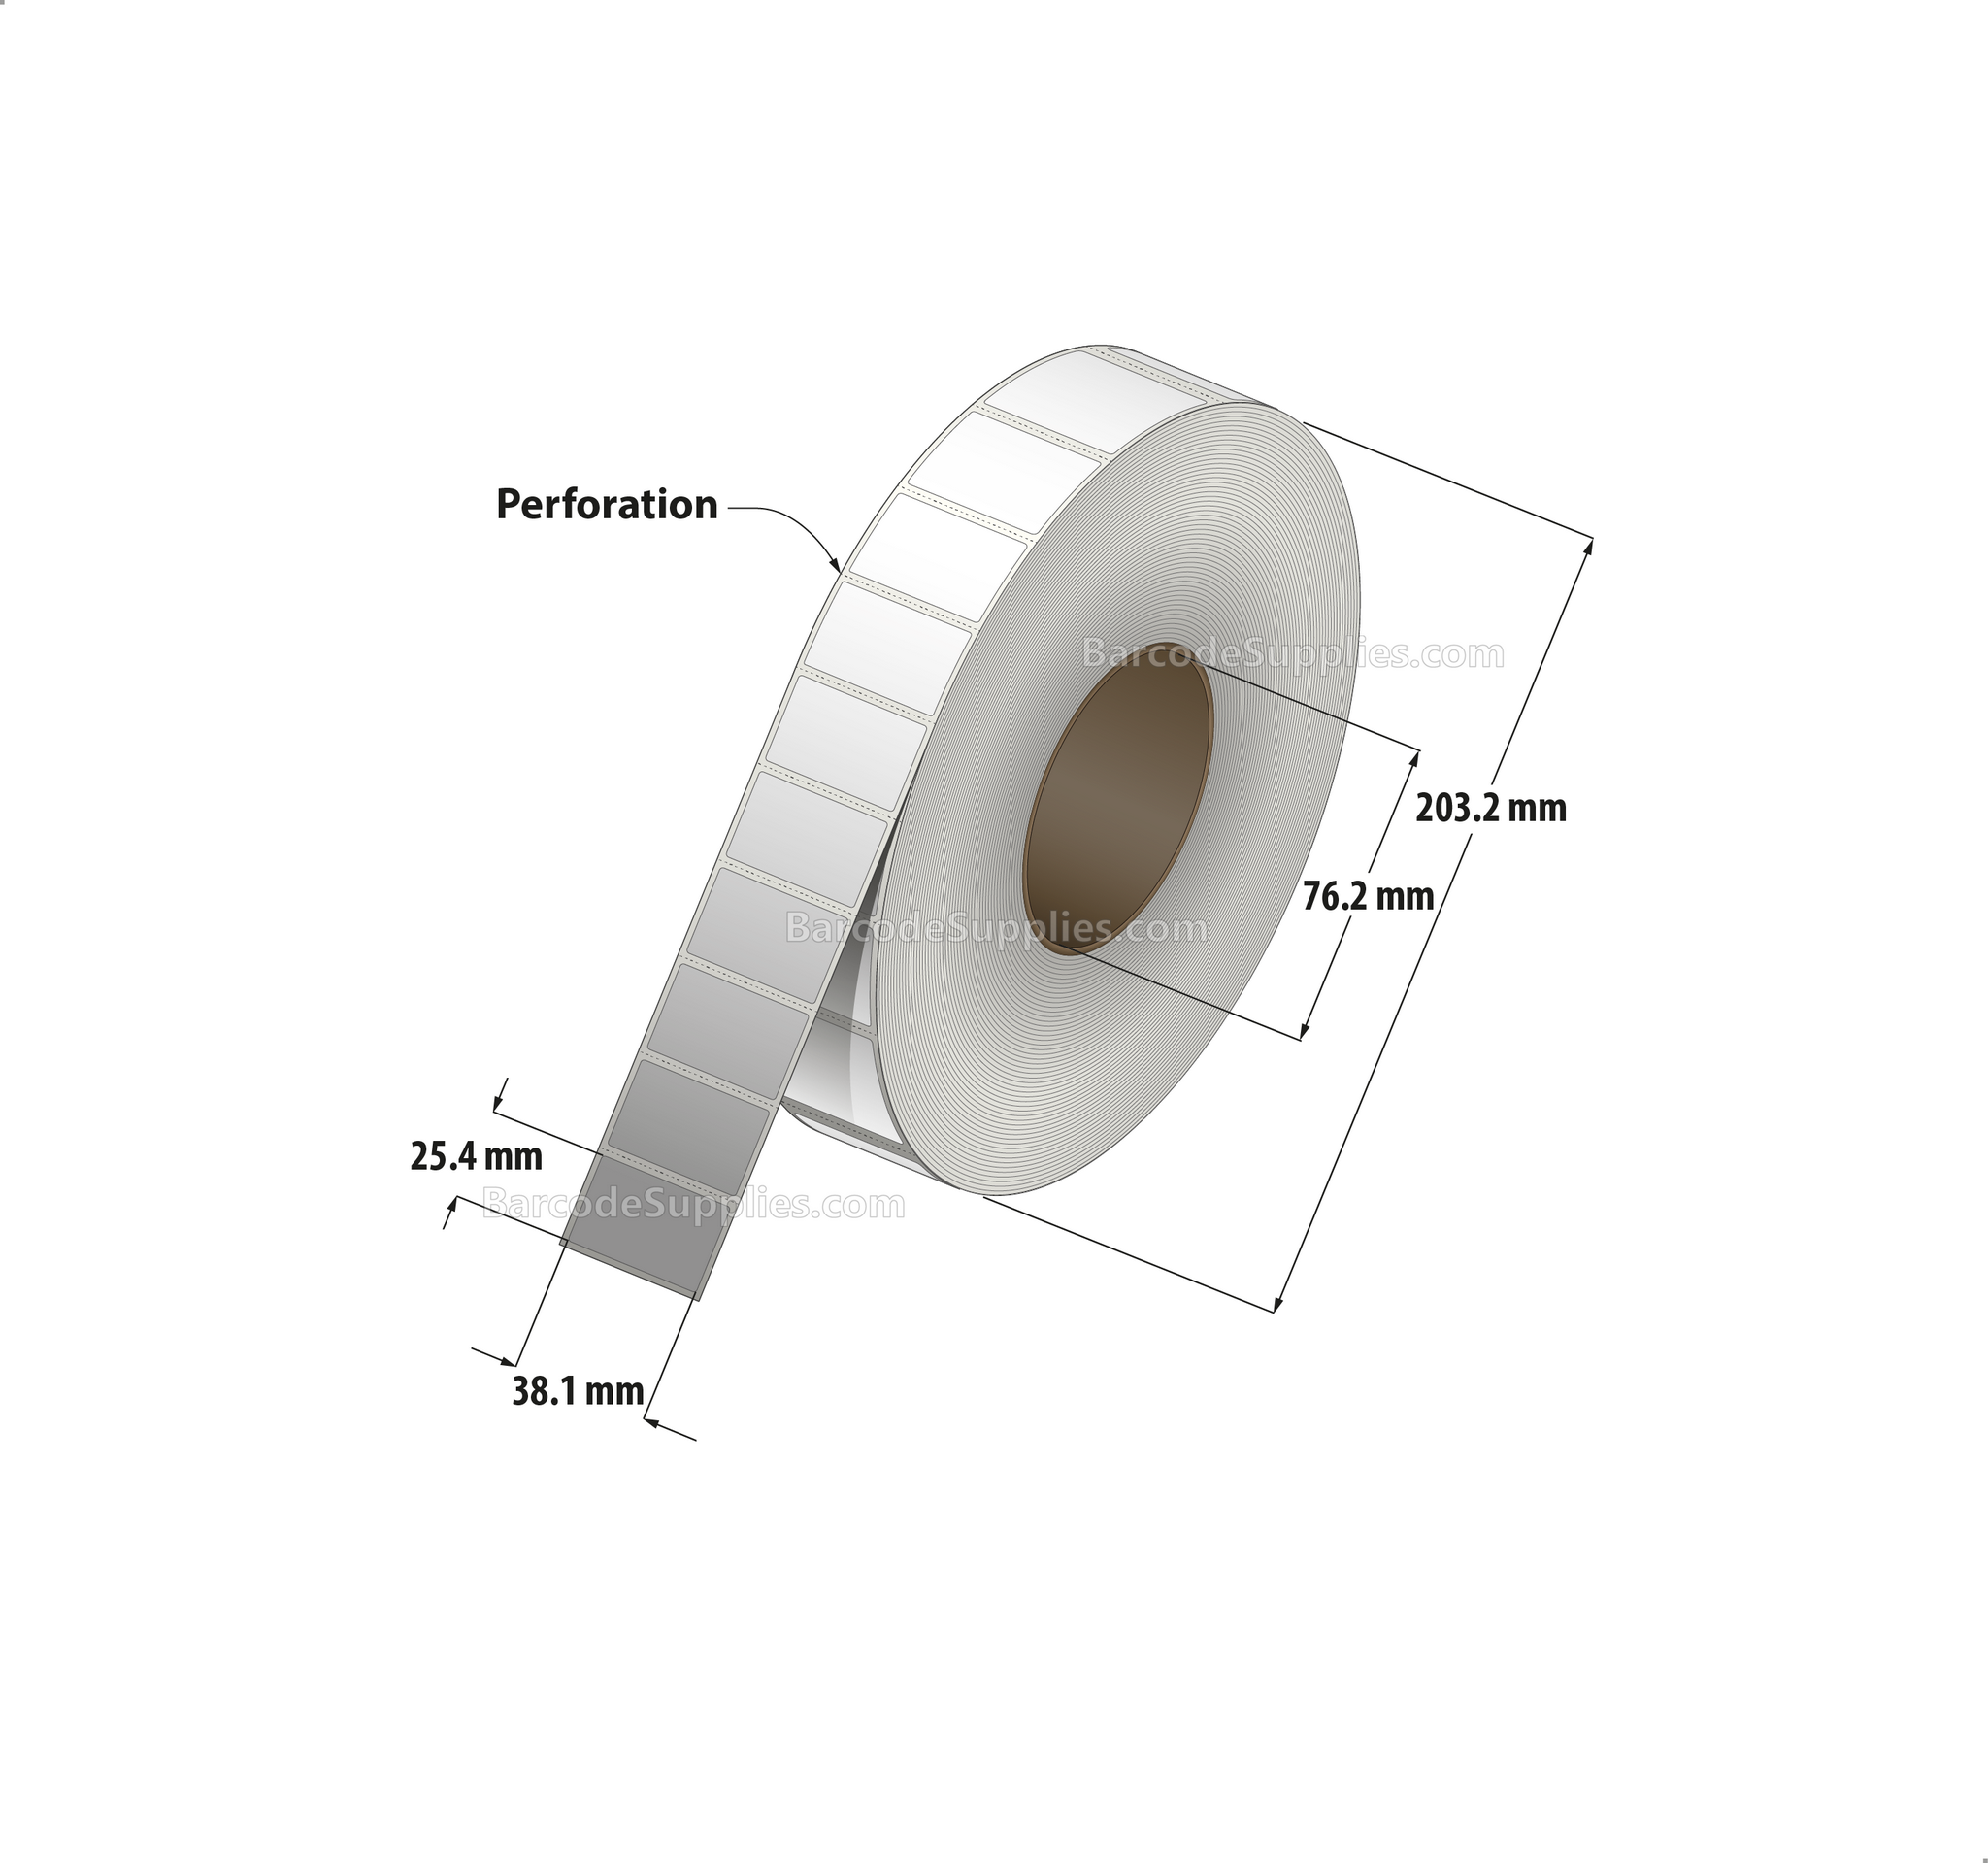 1.5 x 1 Thermal Transfer White Labels With Permanent Acrylic Adhesive - Perforated - 5500 Labels Per Roll - Carton Of 8 Rolls - 44000 Labels Total - MPN: TH151-1P